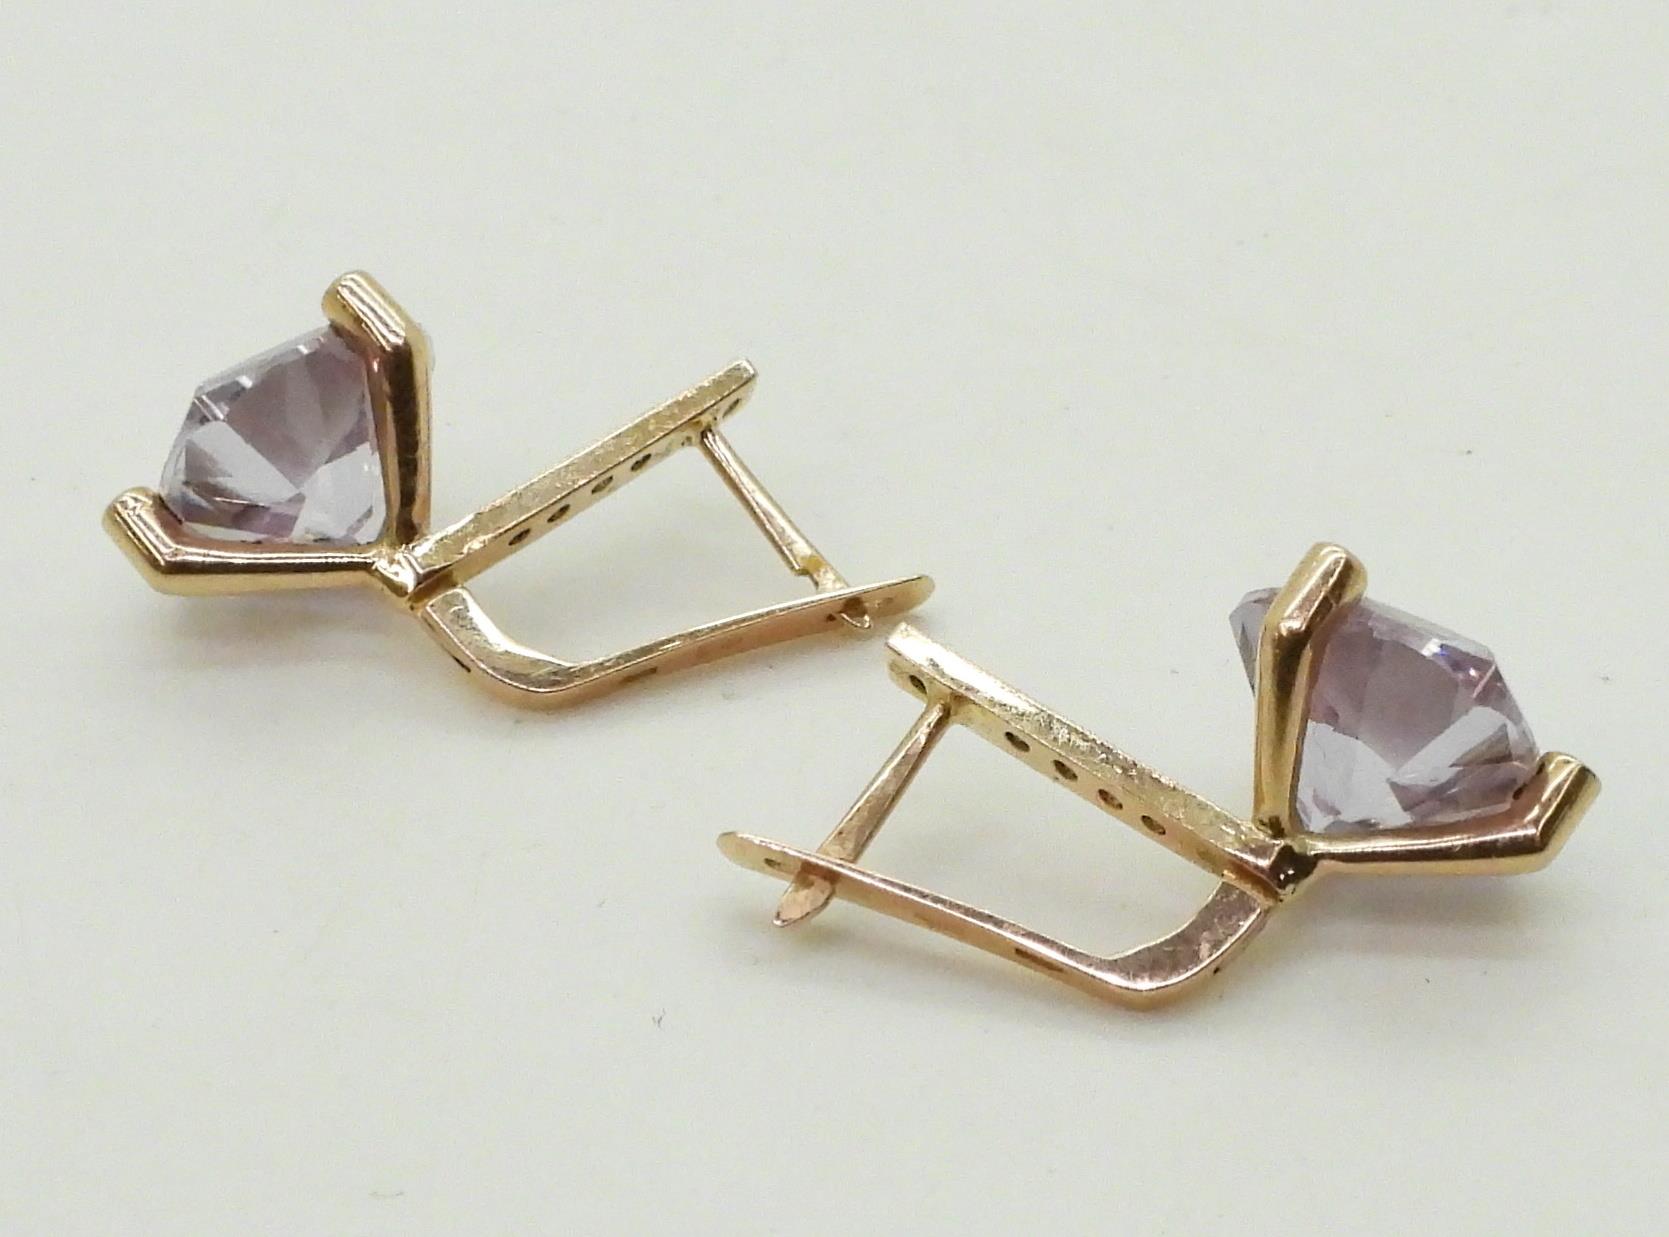 A Russian 14k gold ring and earring suite, set with purple cubic zirconia trilliant cuts, and - Image 3 of 4